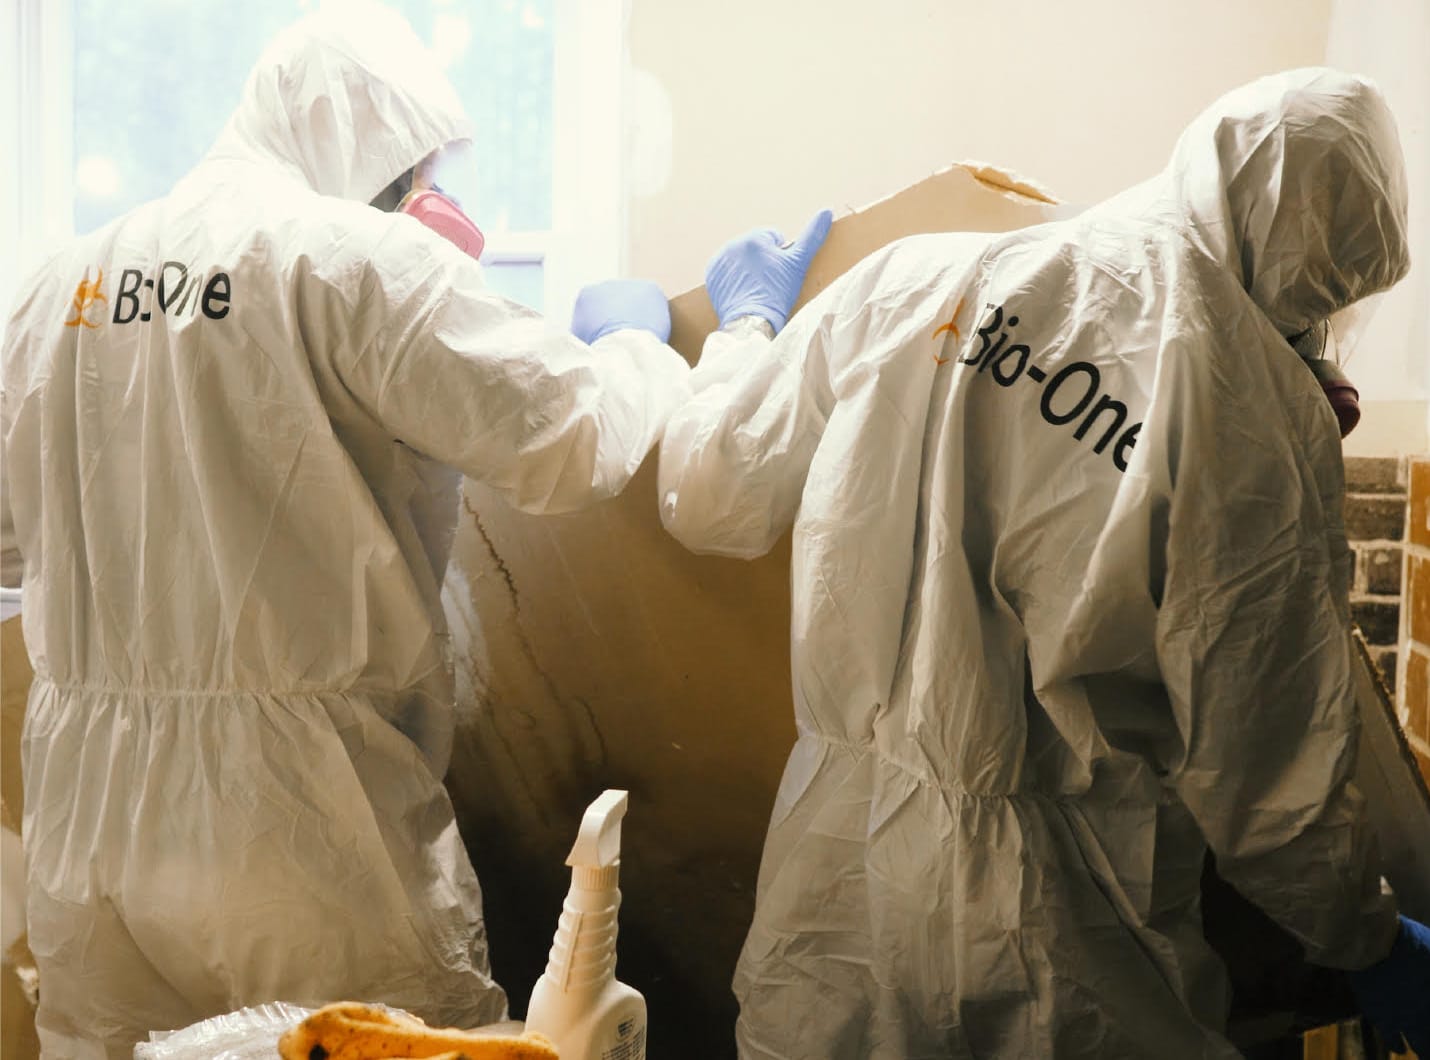 Death, Crime Scene, Biohazard & Hoarding Clean Up Services for Huntingdon